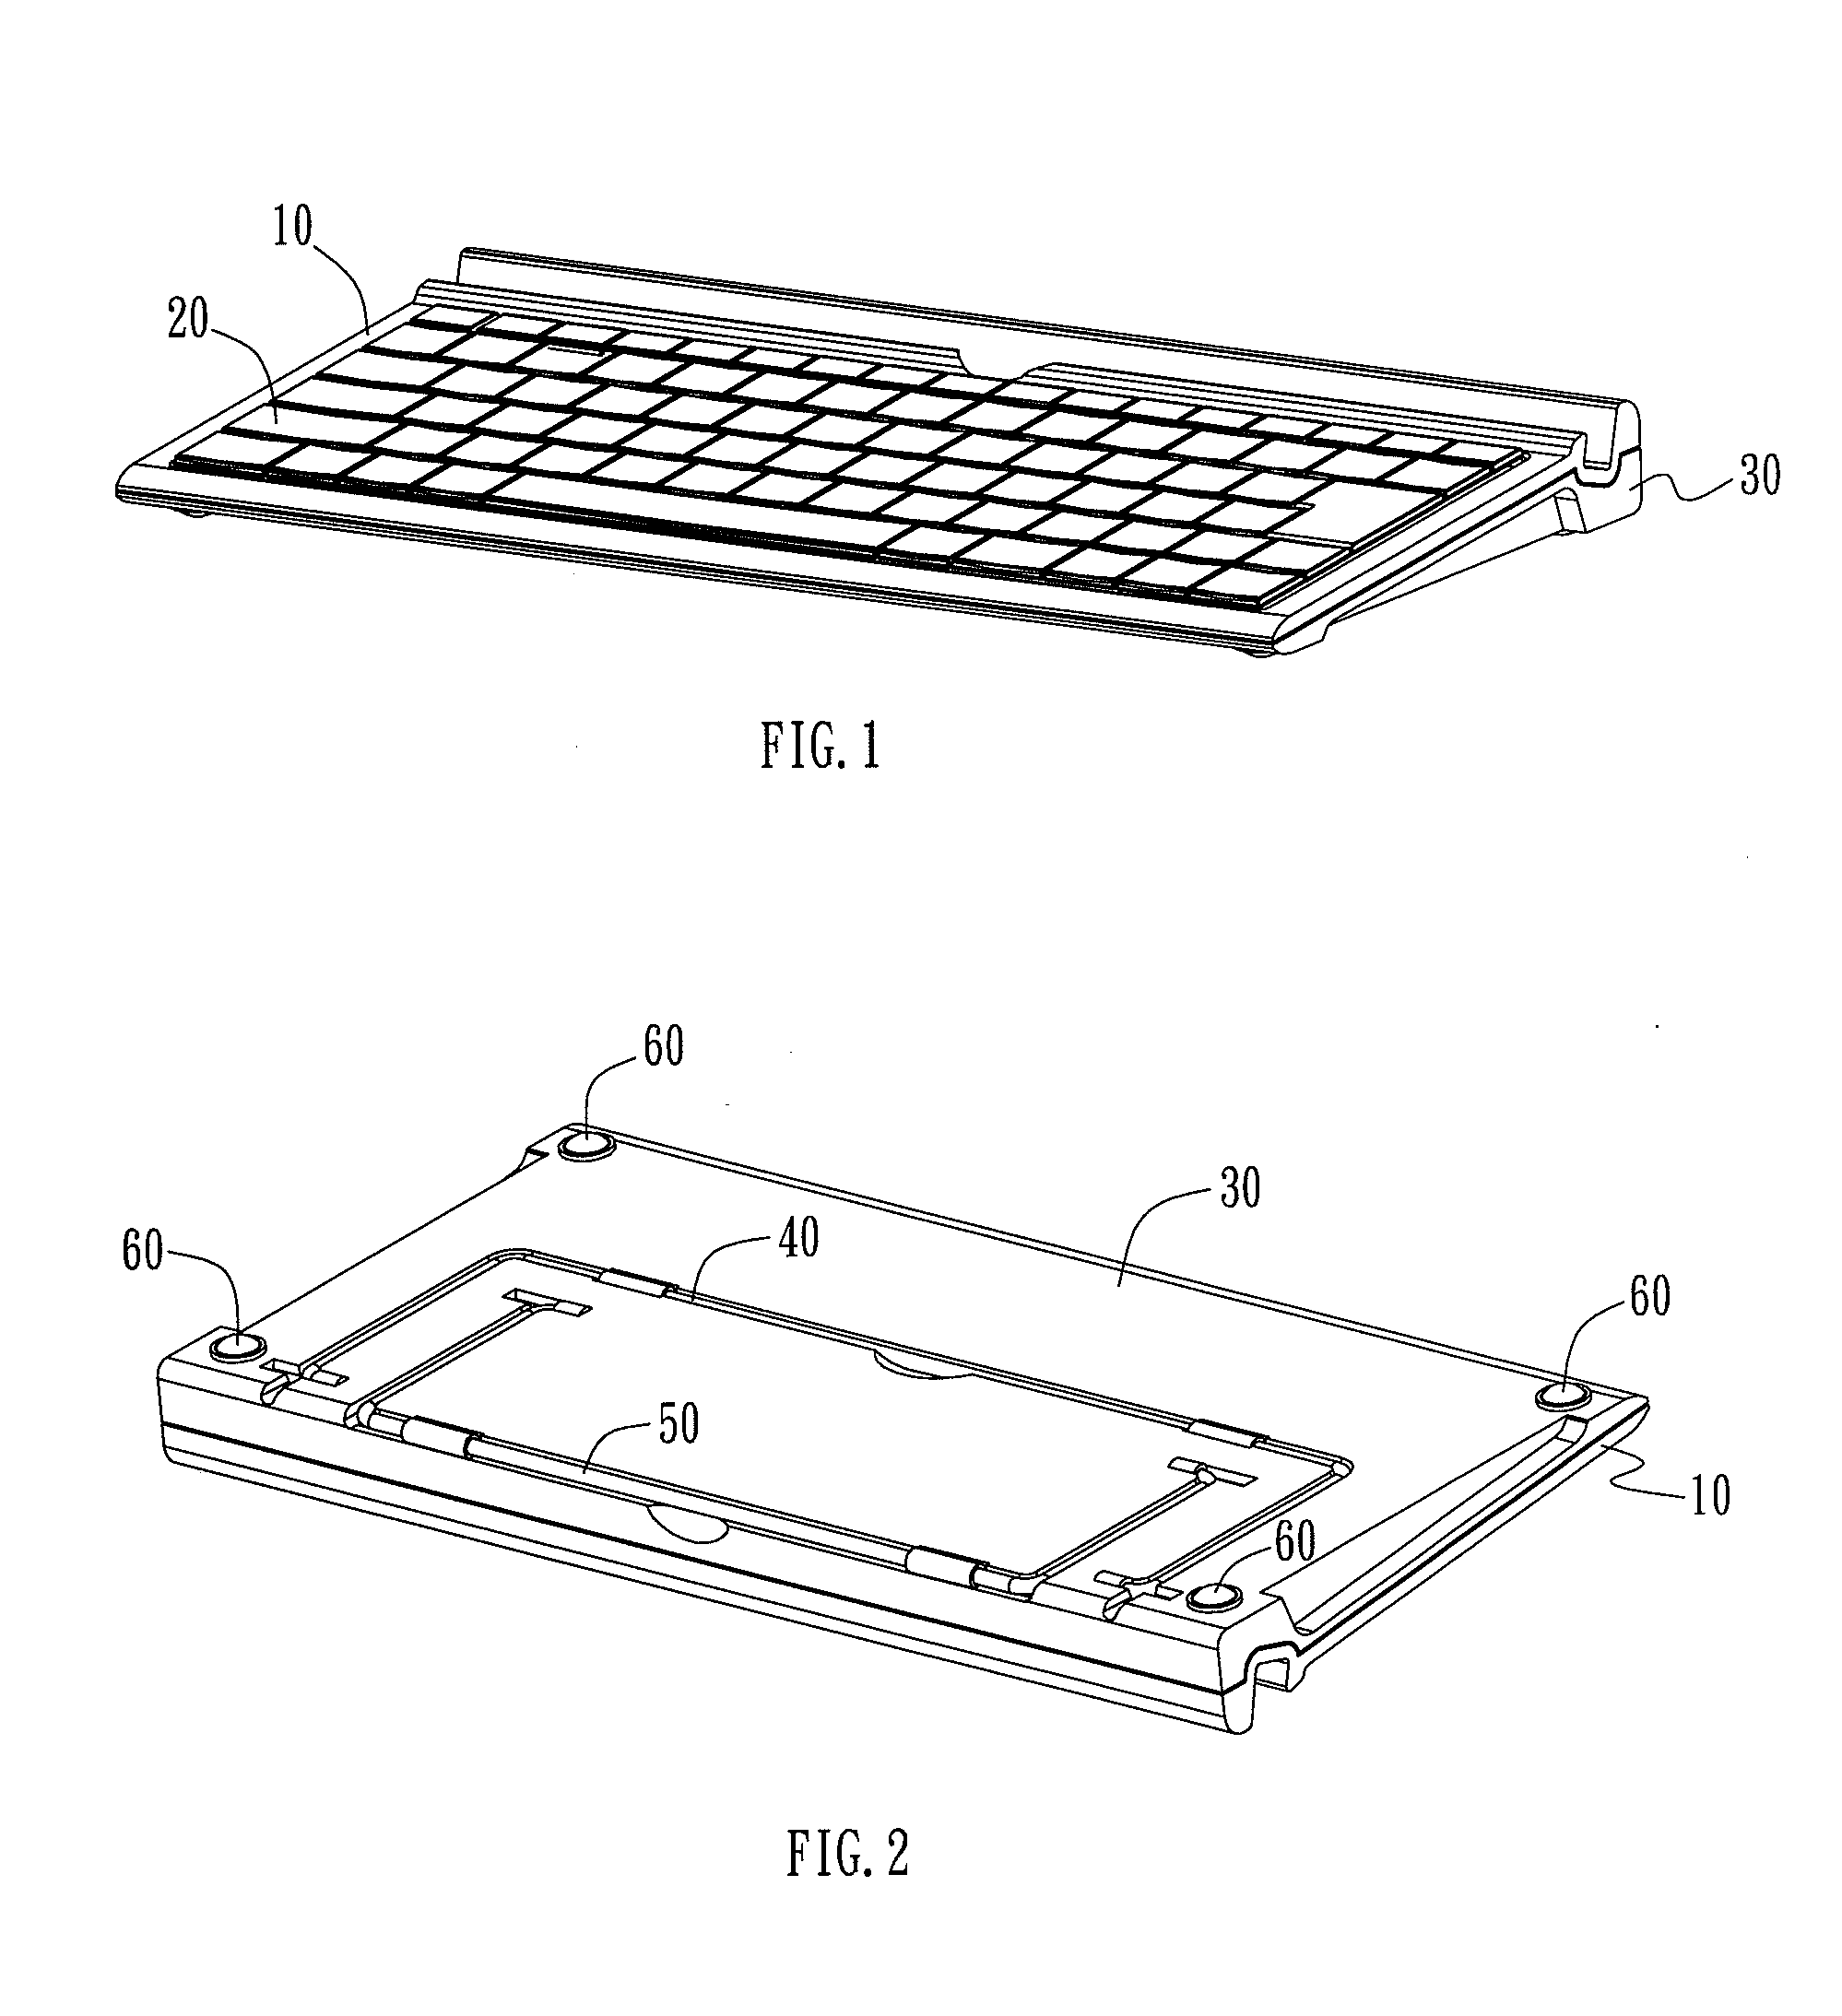 Keyboard device capable of supporting a tablet personal computer